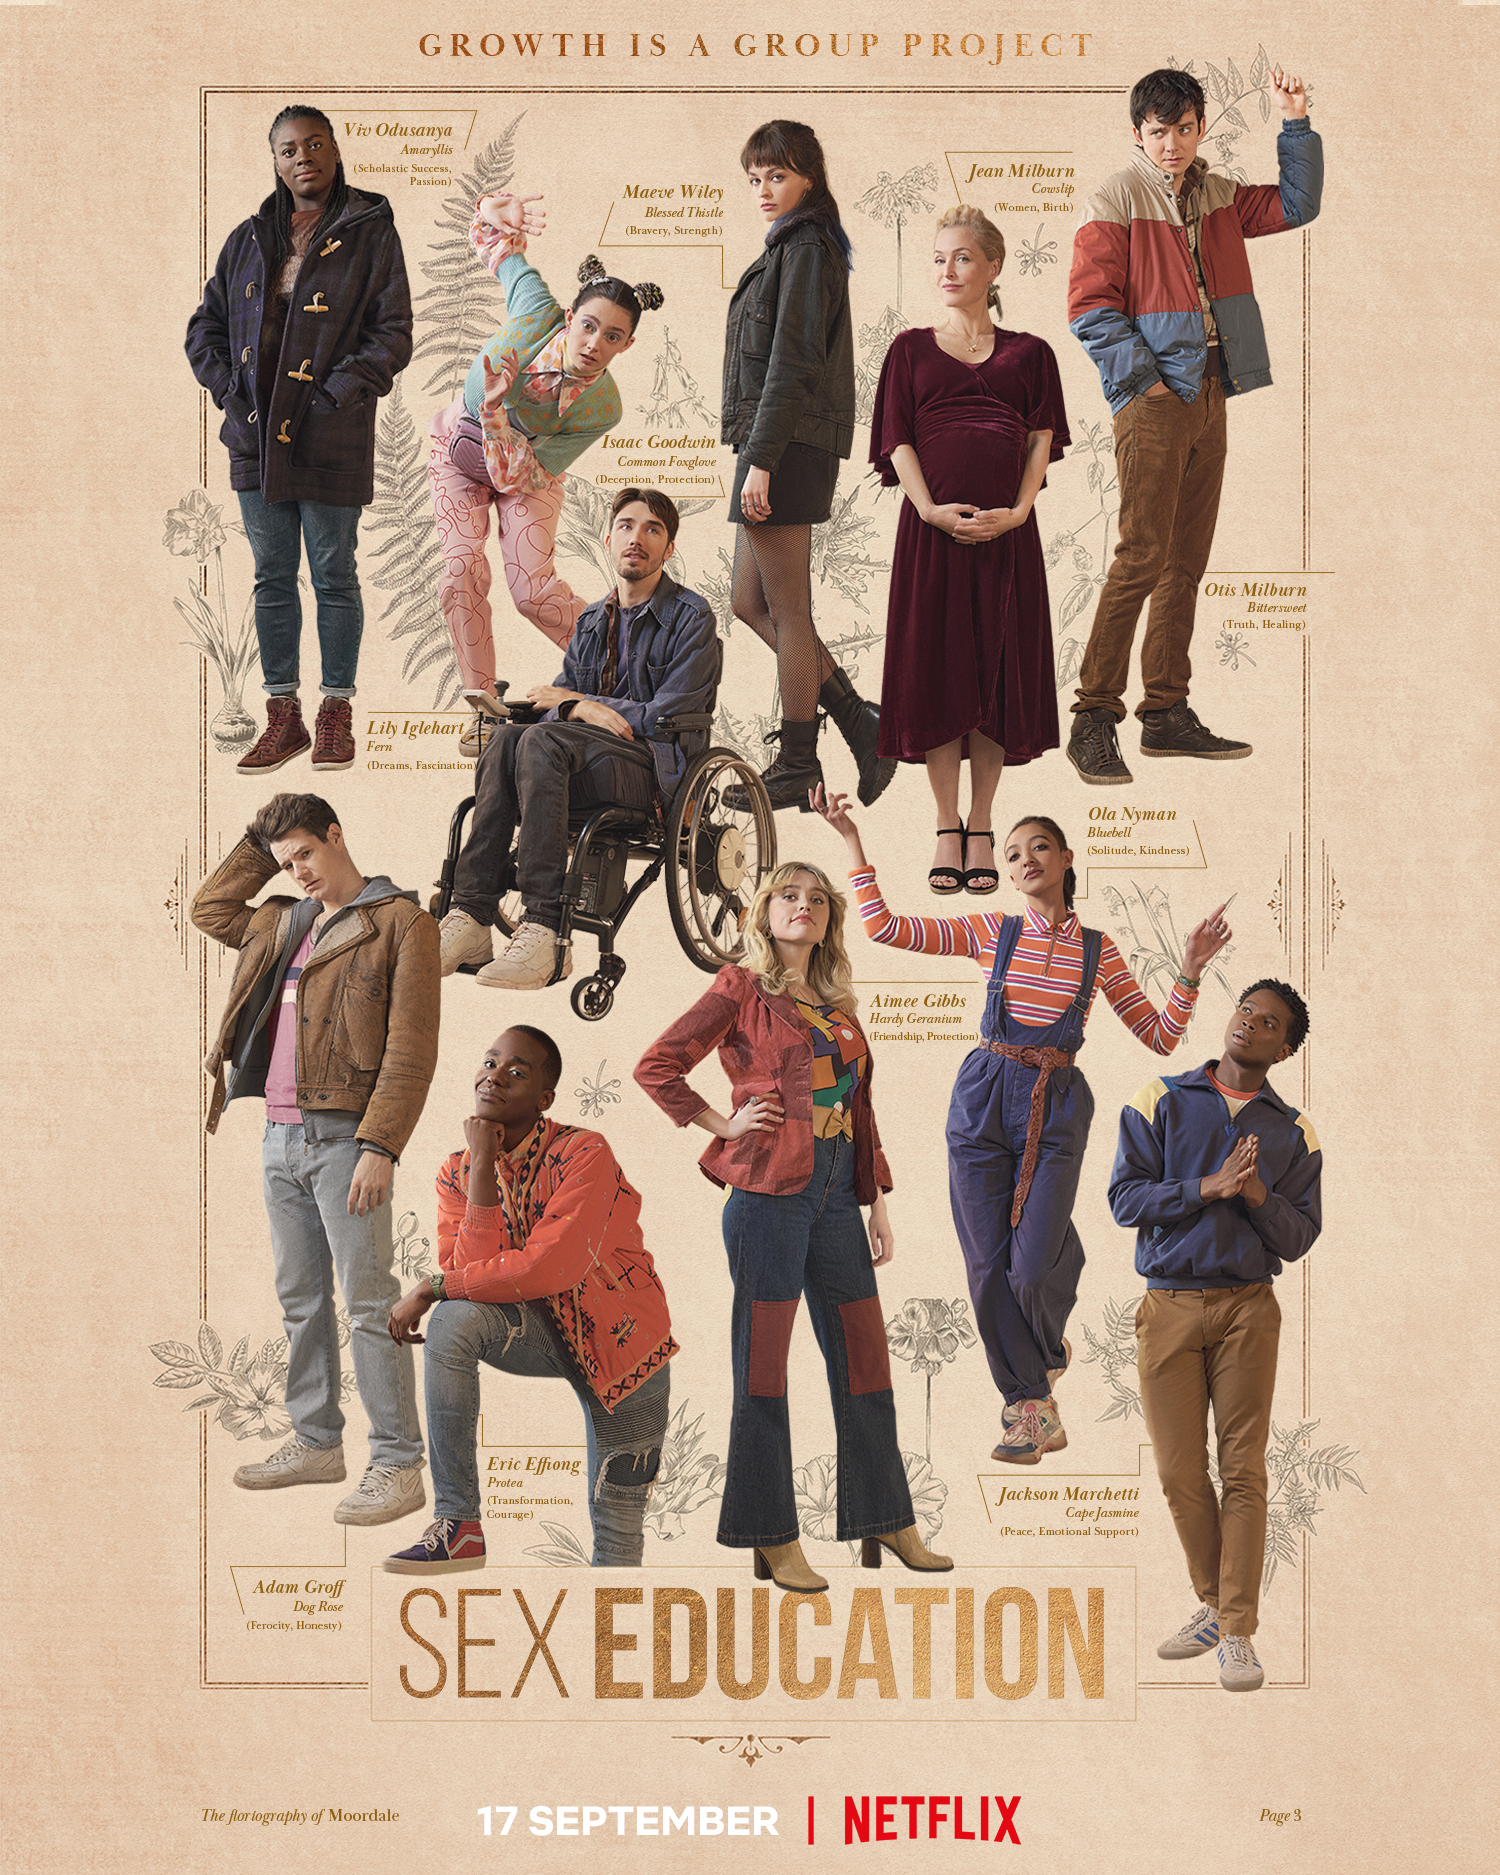 Promotional poster for the third season of Sex Education featuring the primary characters and their names. 